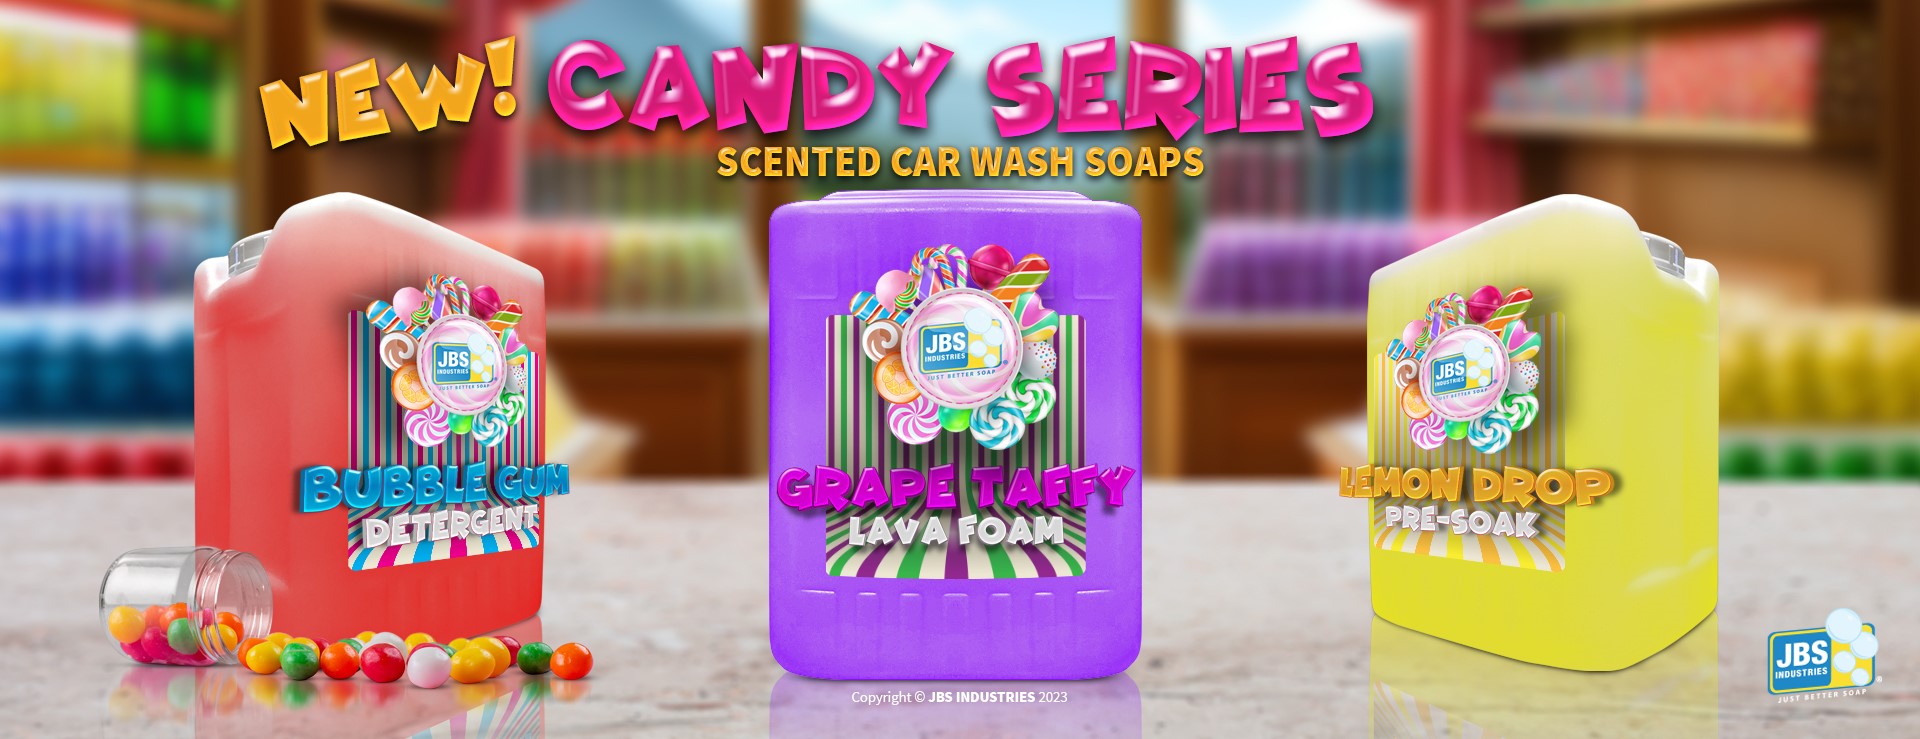 Lavender Scented Touchless Car Wash Soap